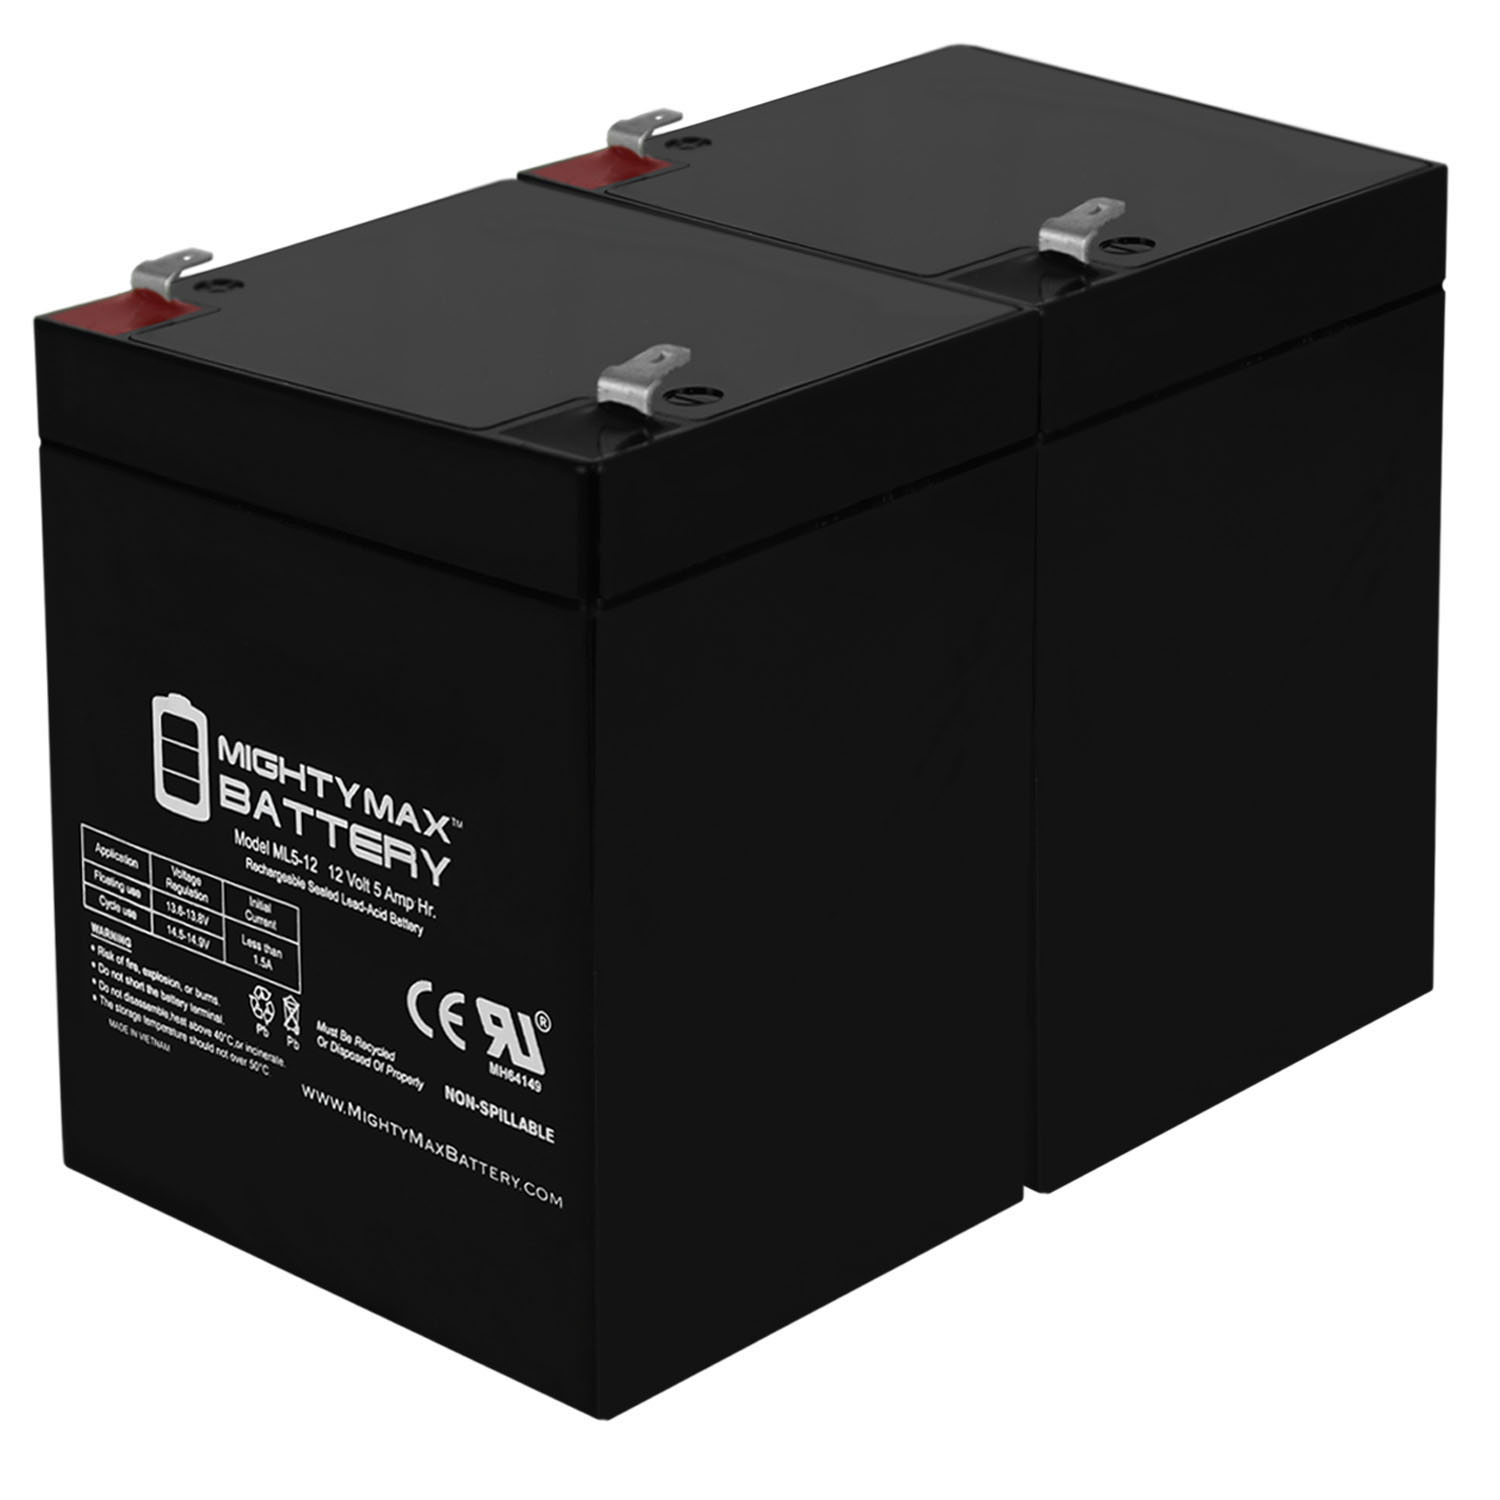 12V 5AH SLA Replacement Battery for CPS5.5-12 - 2 Pack